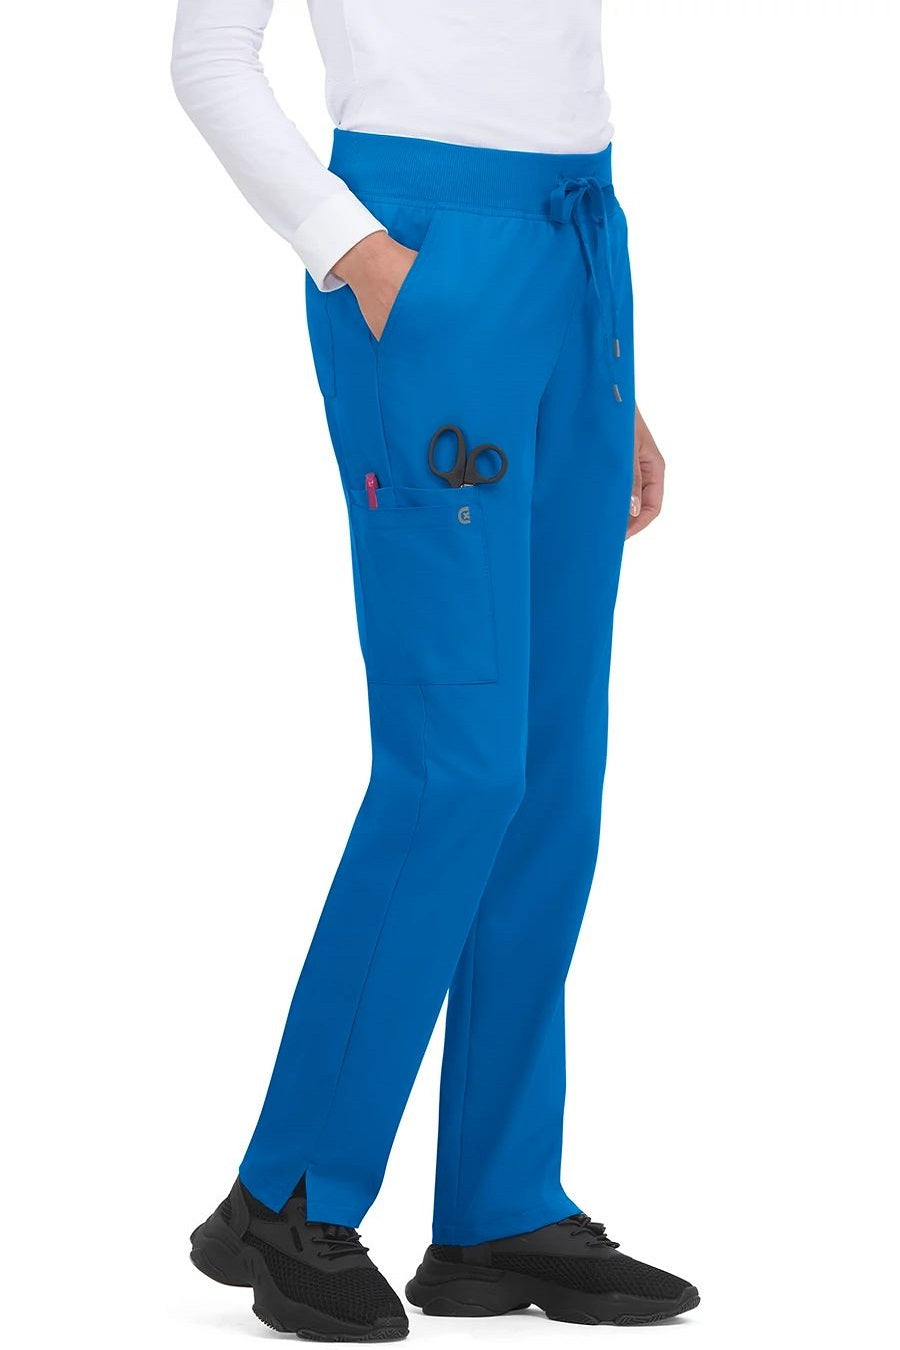 koi Scrub Pants Cureology Atria in Petite Royal at Parker's Clothing and Shoes.